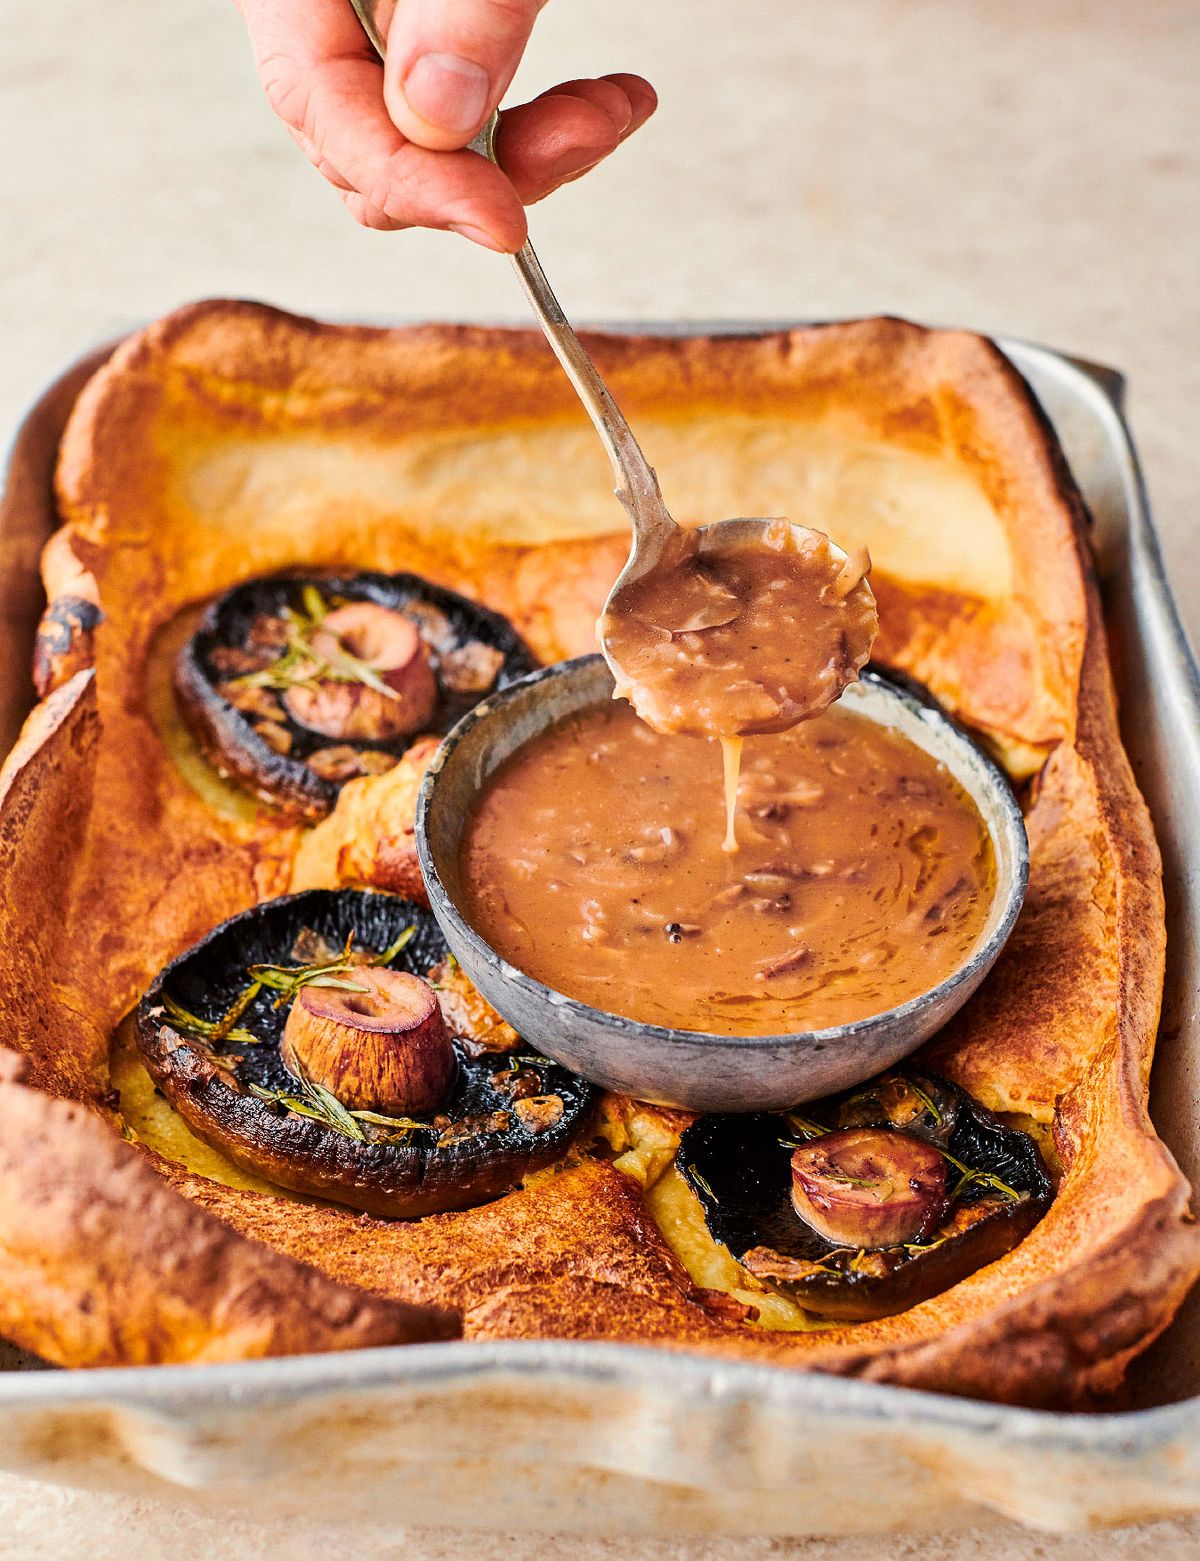 Jamie Oliver’s Mushroom Toad-in-the-Hole